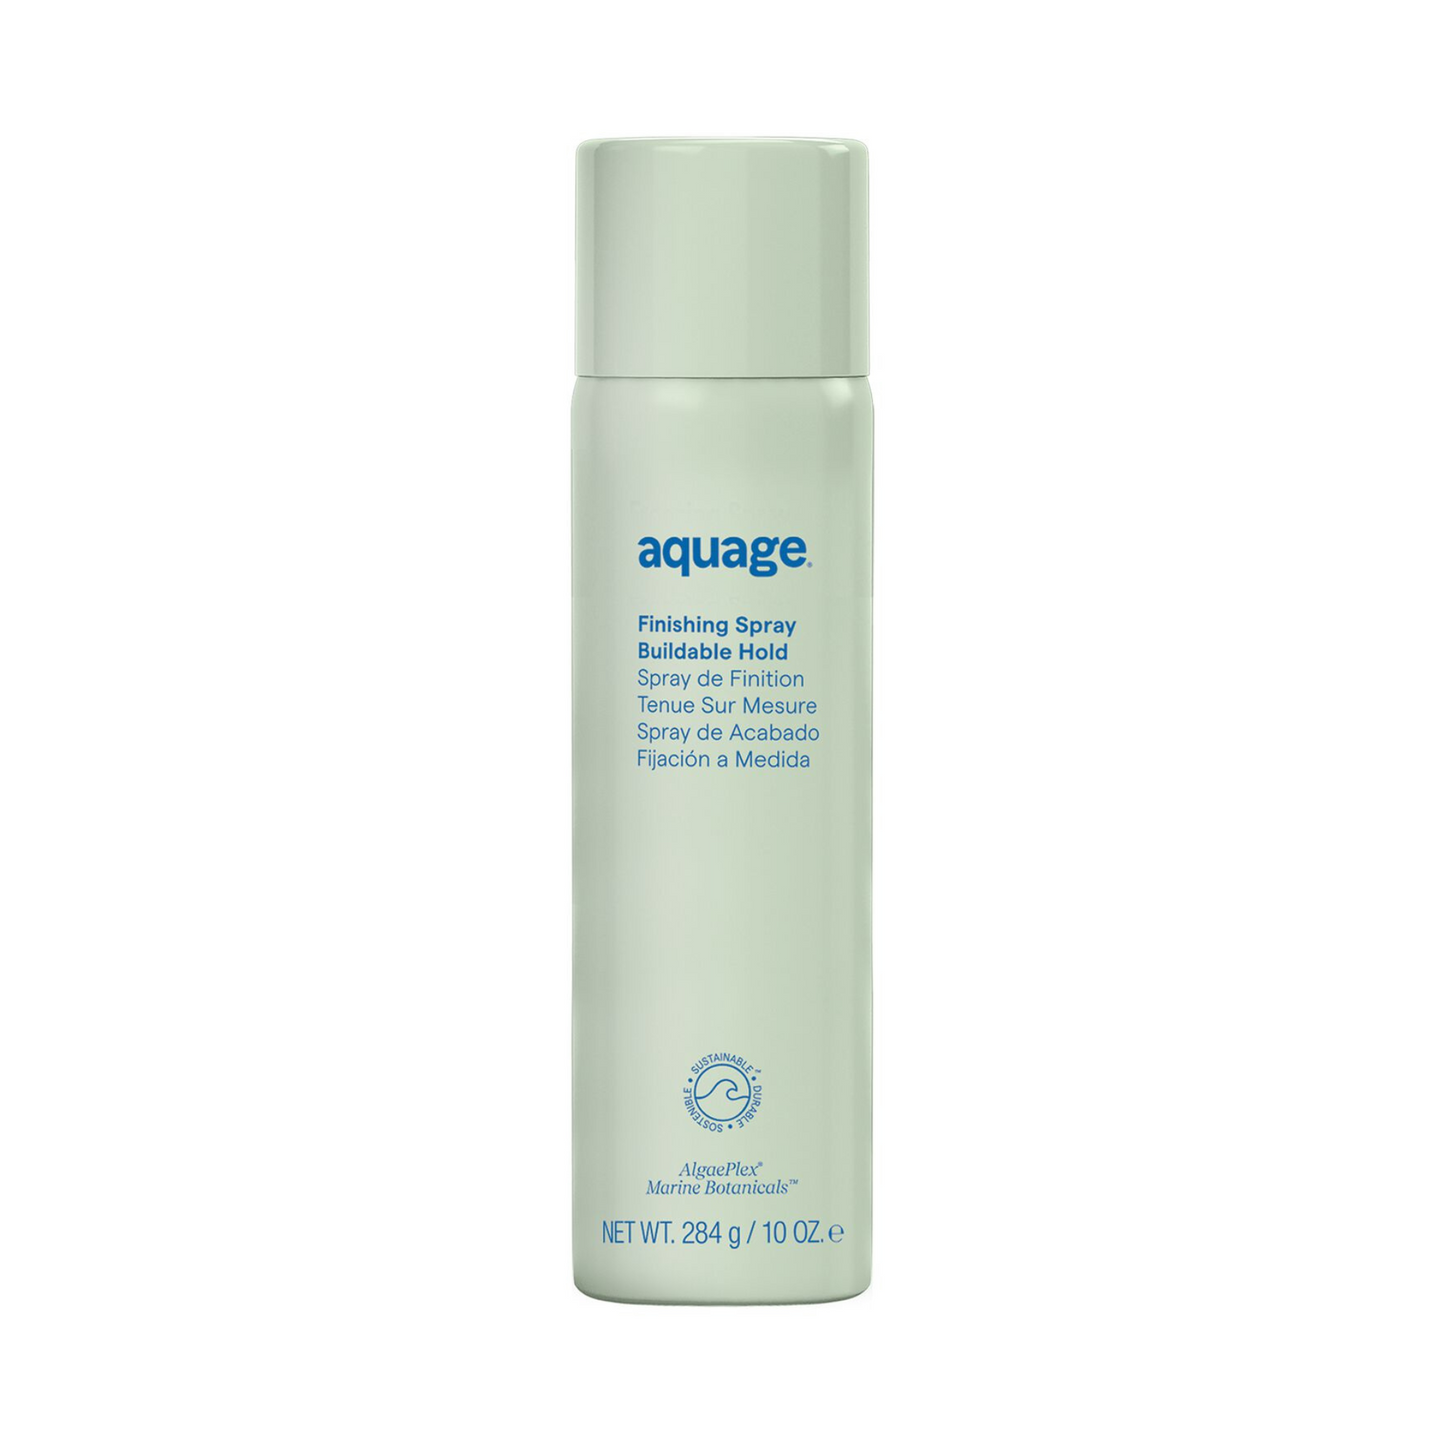 Aquage Finishing Spray Buildable Hold